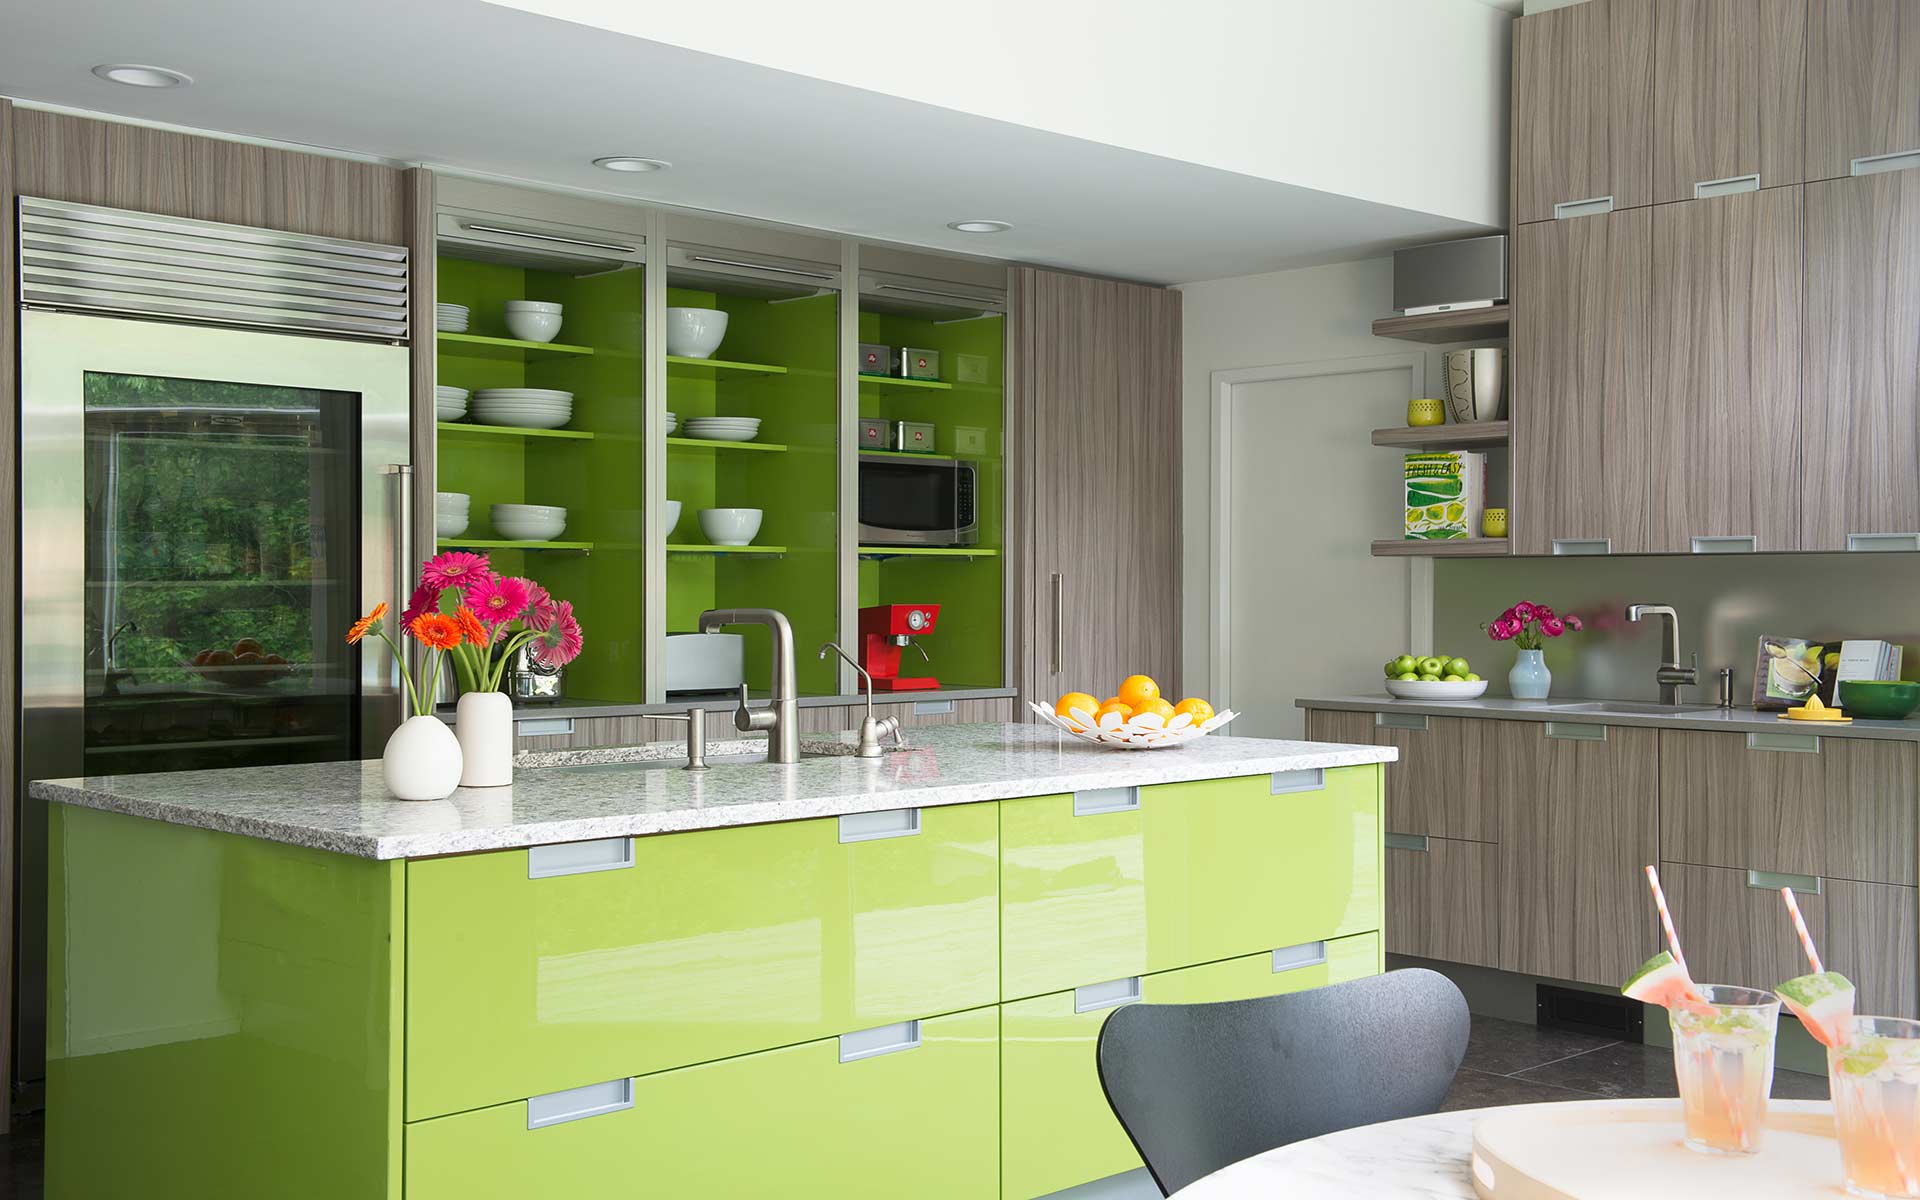 DEANE Inc custom lime green kitchen with custom cabinetry, custom built in shelving and stainless steel appliances.